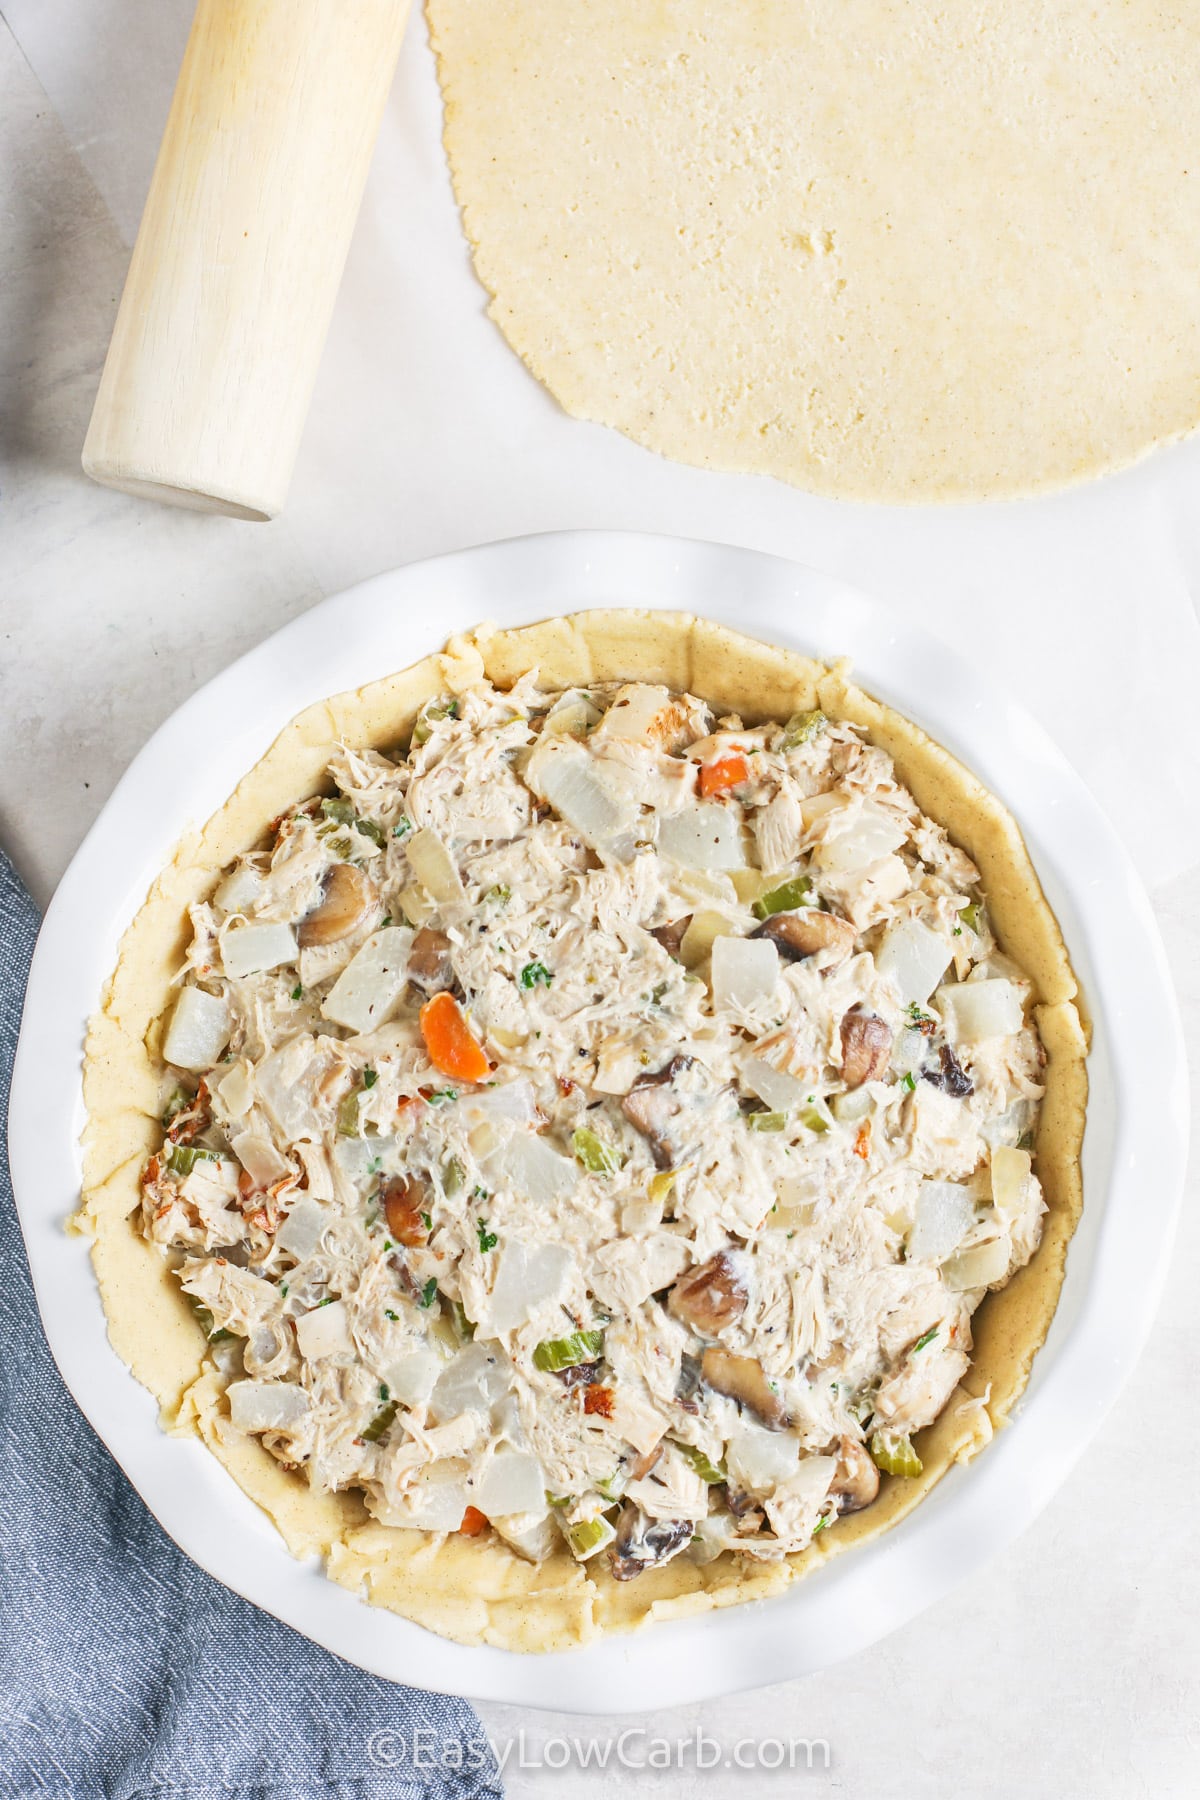 adding filling to pie crust to make Low Carb Chicken Pot Pie